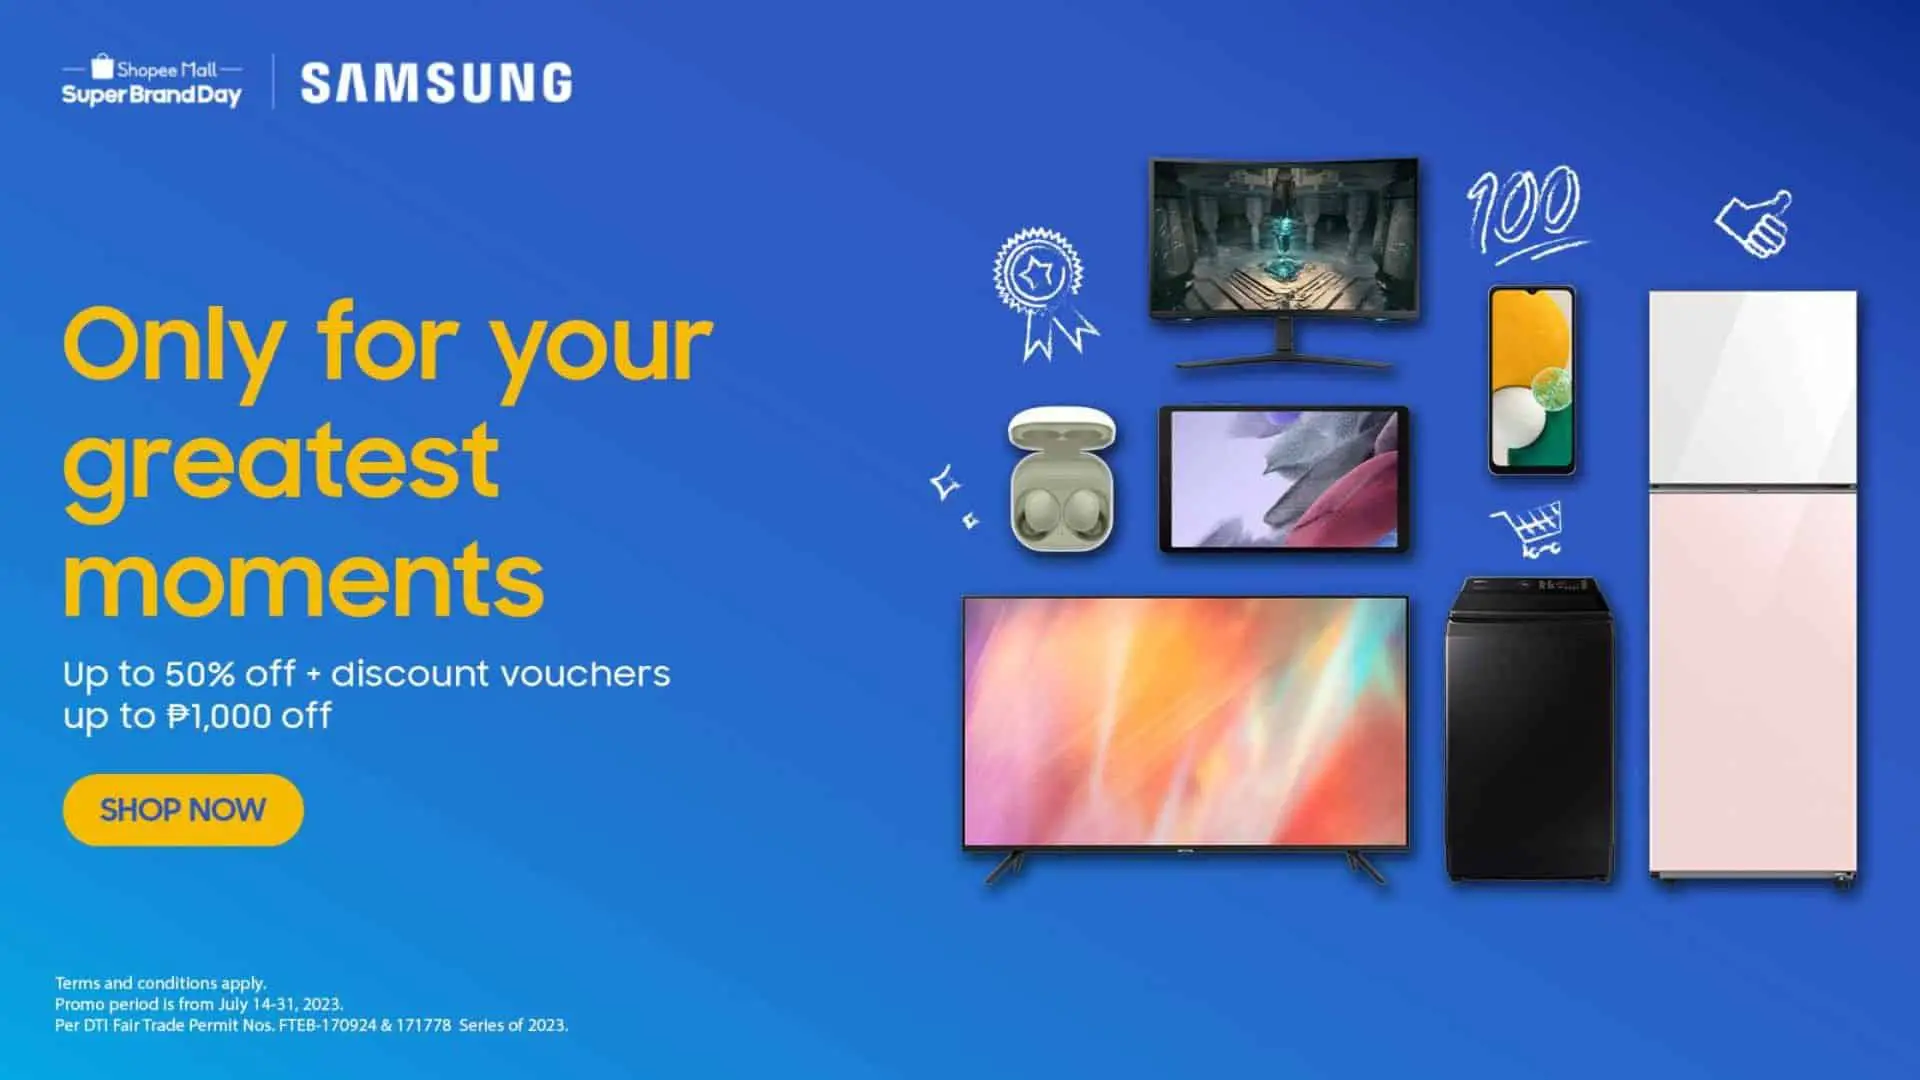 Get Ready for “Only For Your Greatest Moments” Deals on the Samsung x Shopee Super Brand Day 2023